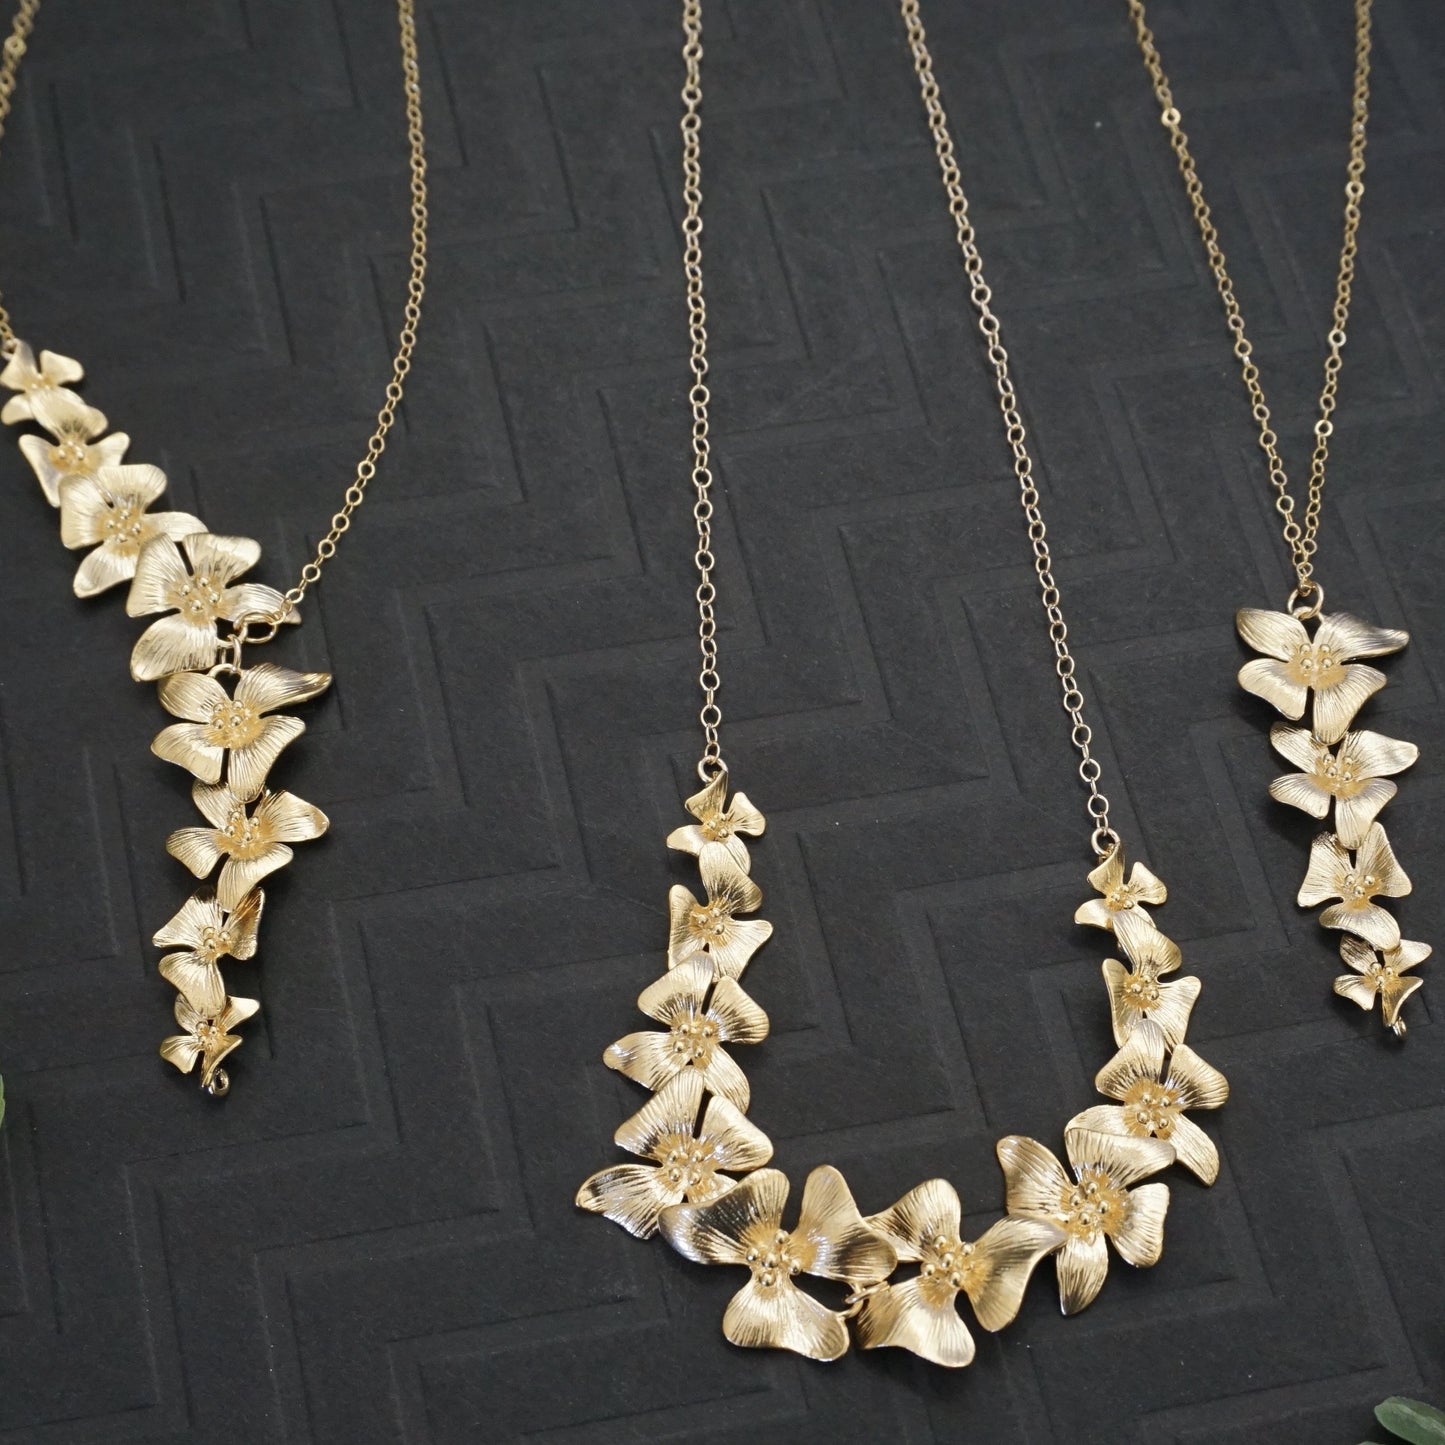 3 different styles of dogwood necklace